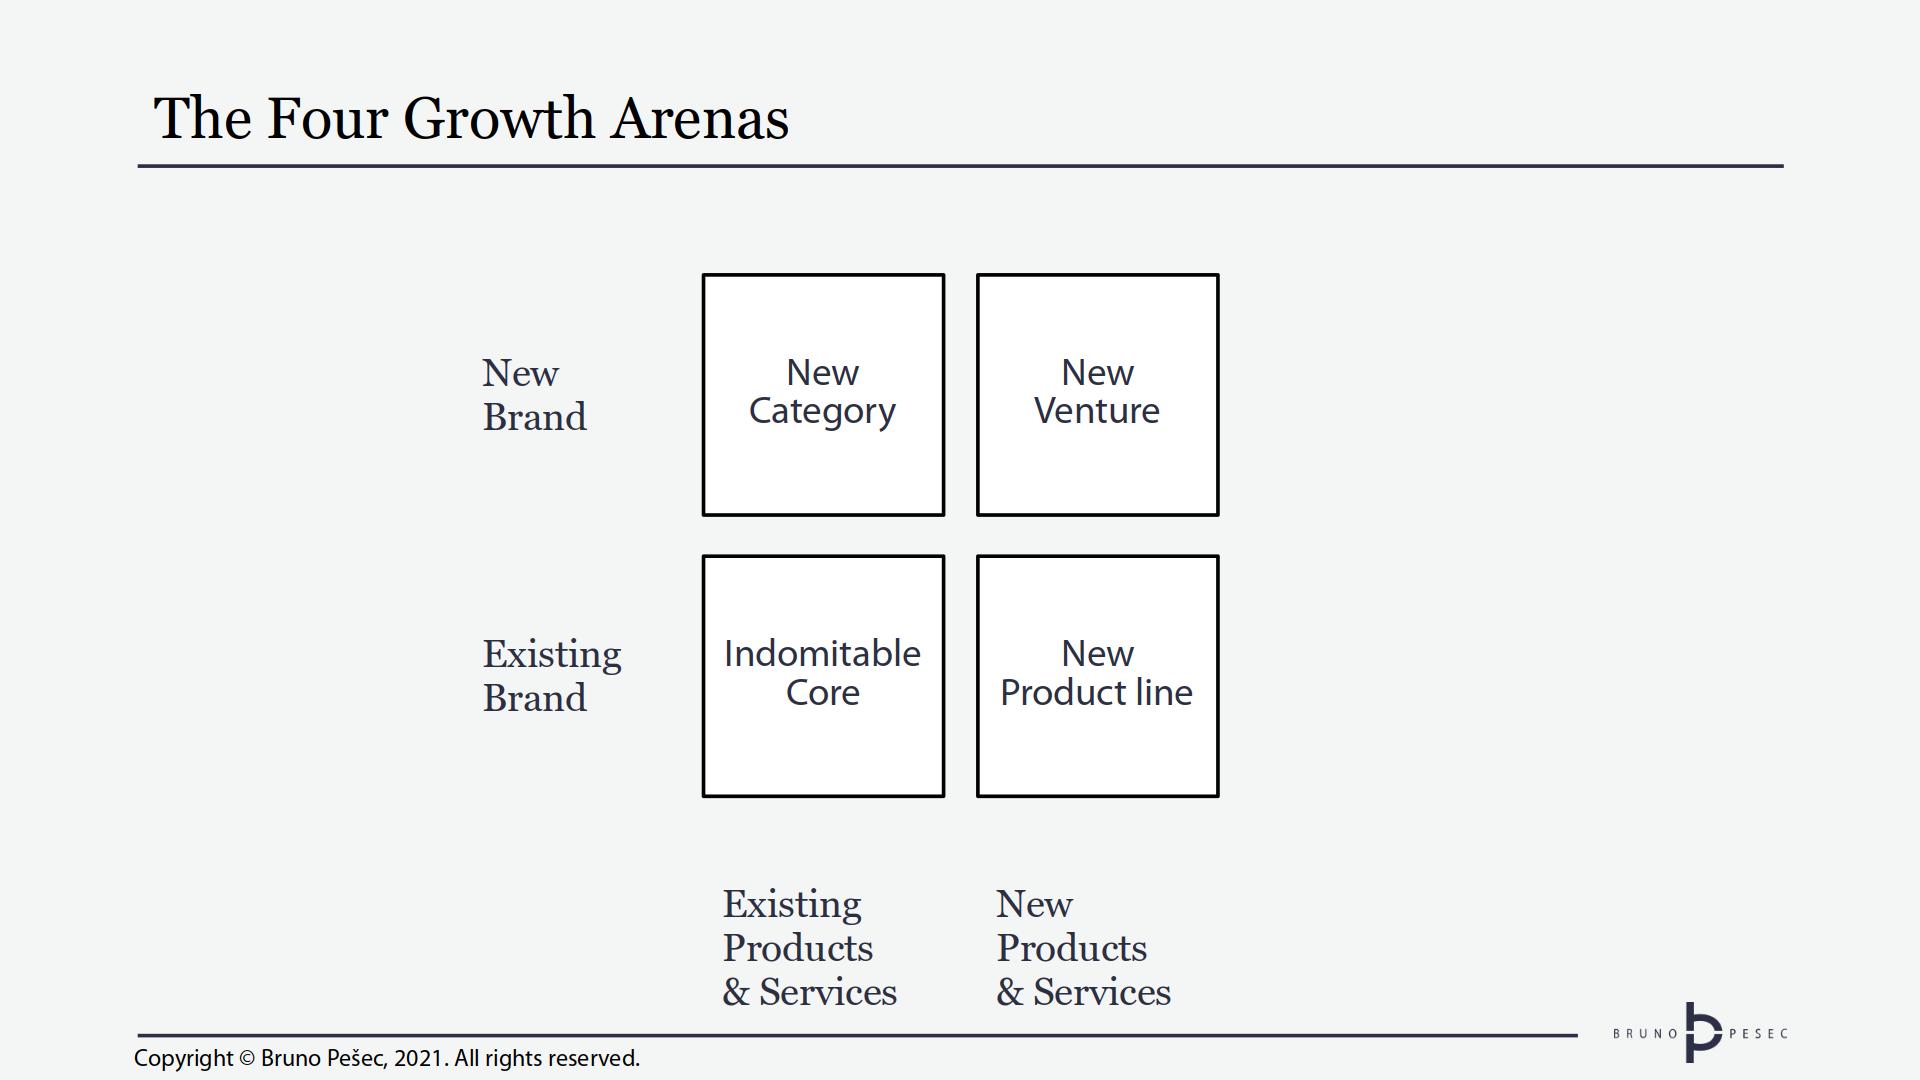 The Four Growth Arenas. Copyright © Bruno Pešec and Matthew Fenton, 2021. All rights reserved.